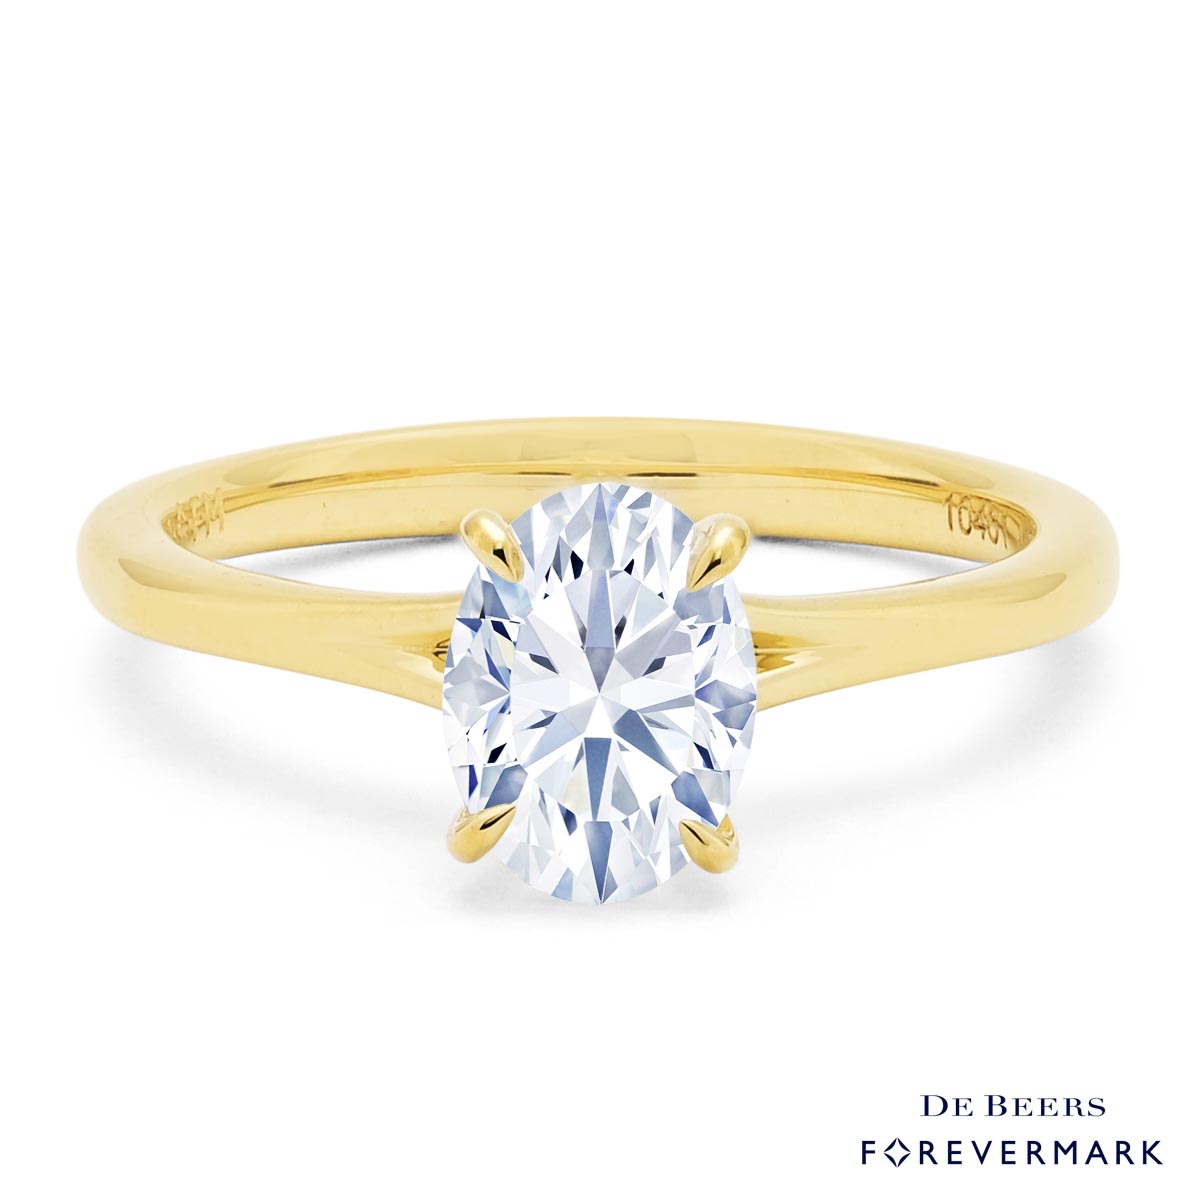 De Beers Forevermark Oval Diamond Icon Setting Engagement Ring in 18kt Yellow Gold (1ct)